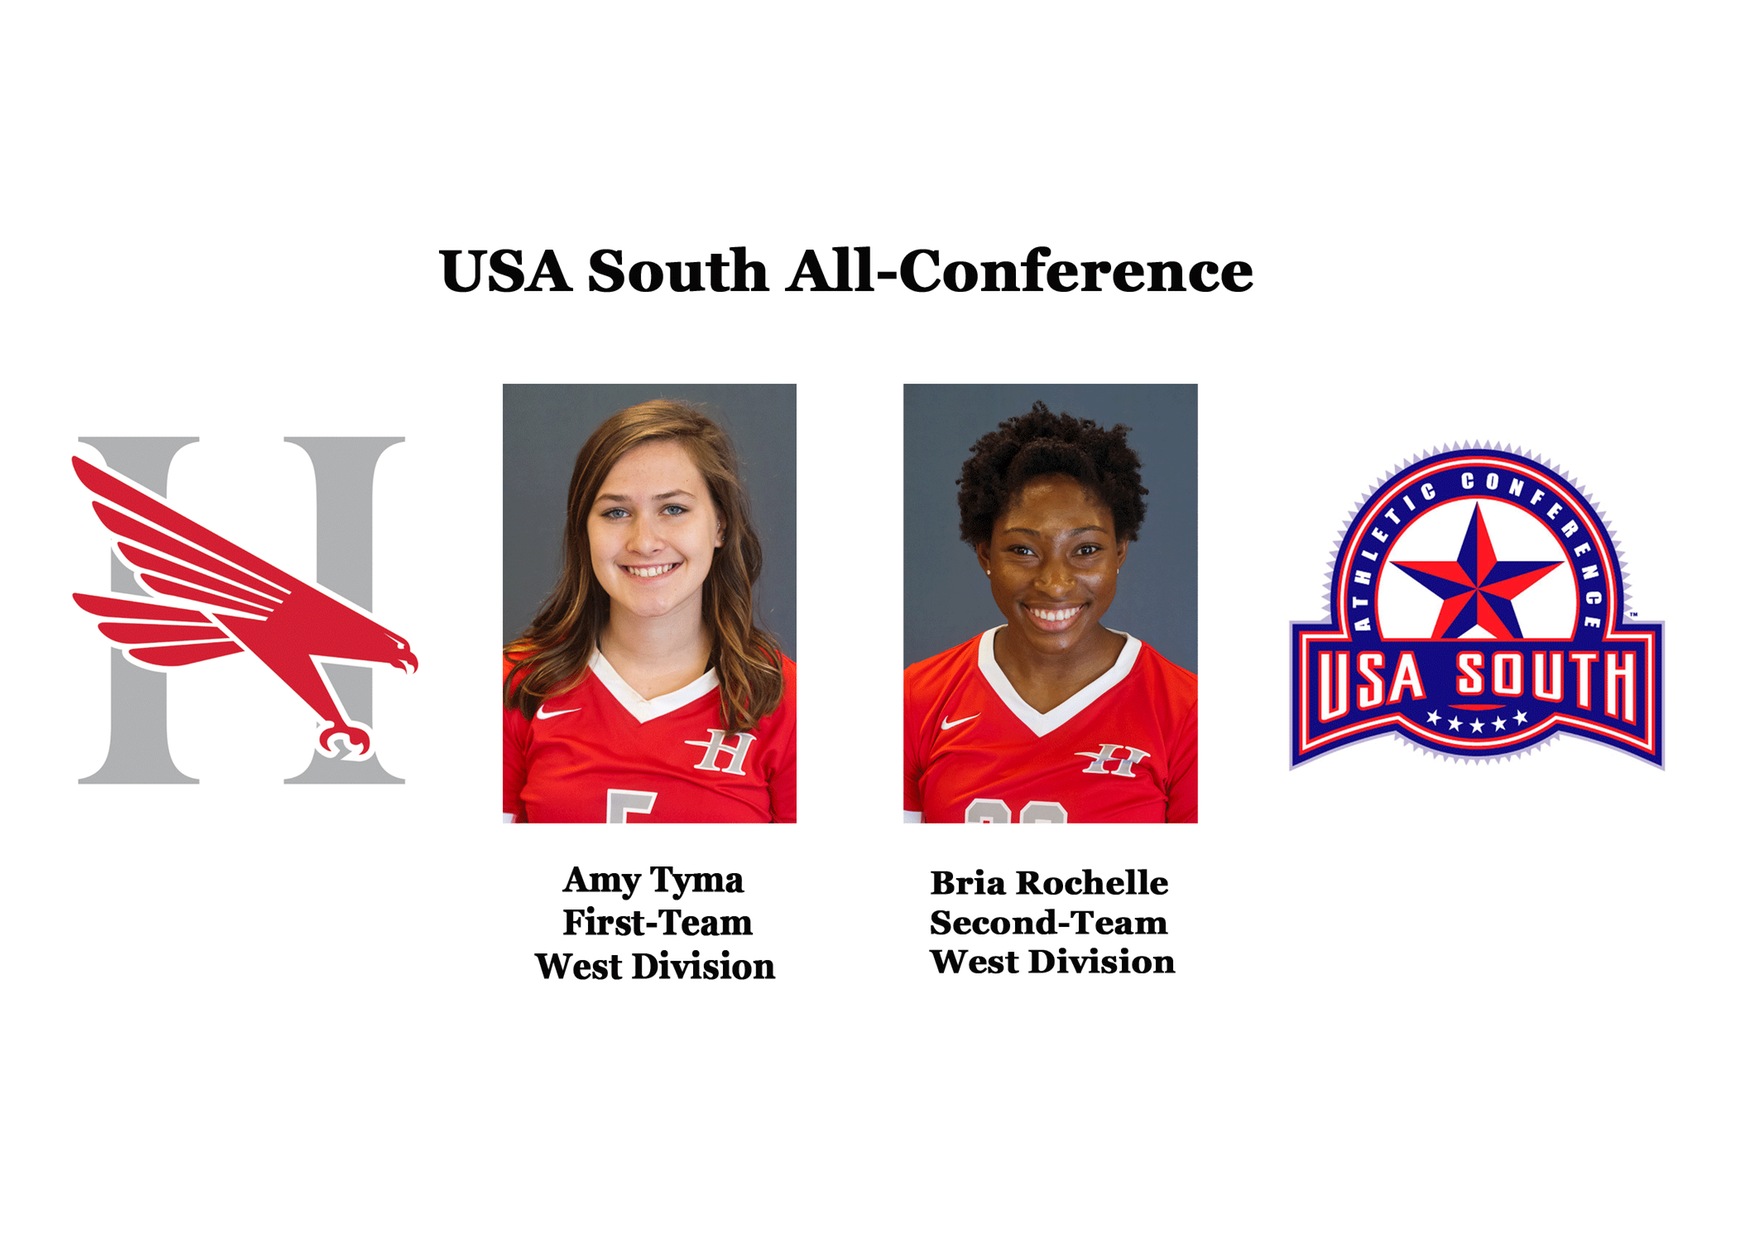 Tyma and Rochelle earn West Division honors from USA South